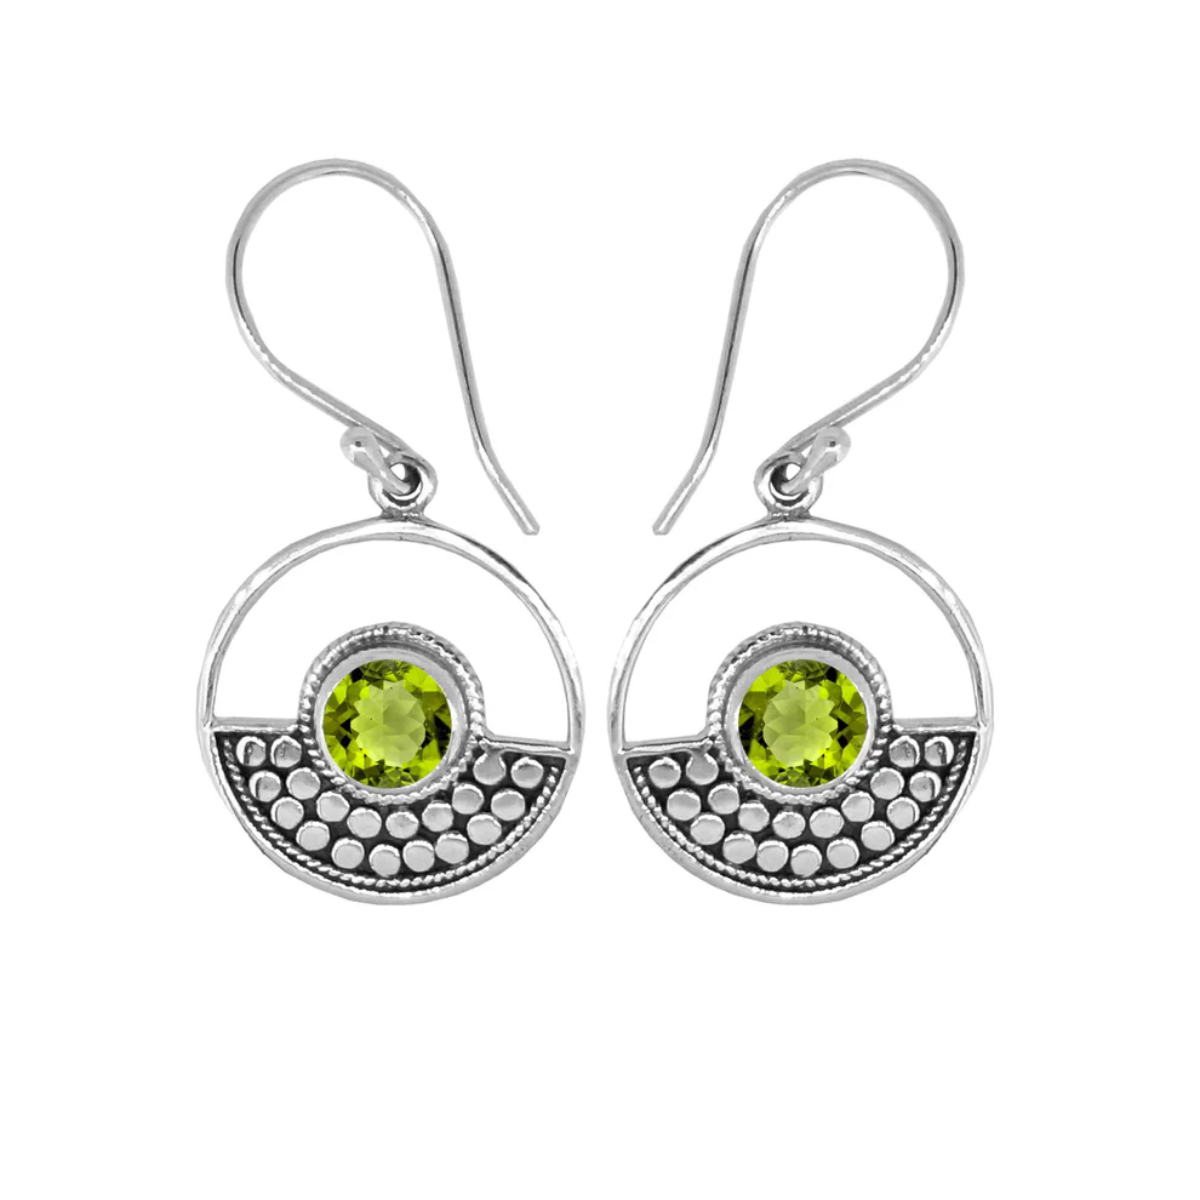 Sterling Silver design in a circle surrounds a circular peridot stone on ear wires. Half of the circle is dotted with an oxidized sterling design, the other half is open.  On a plain white background. 